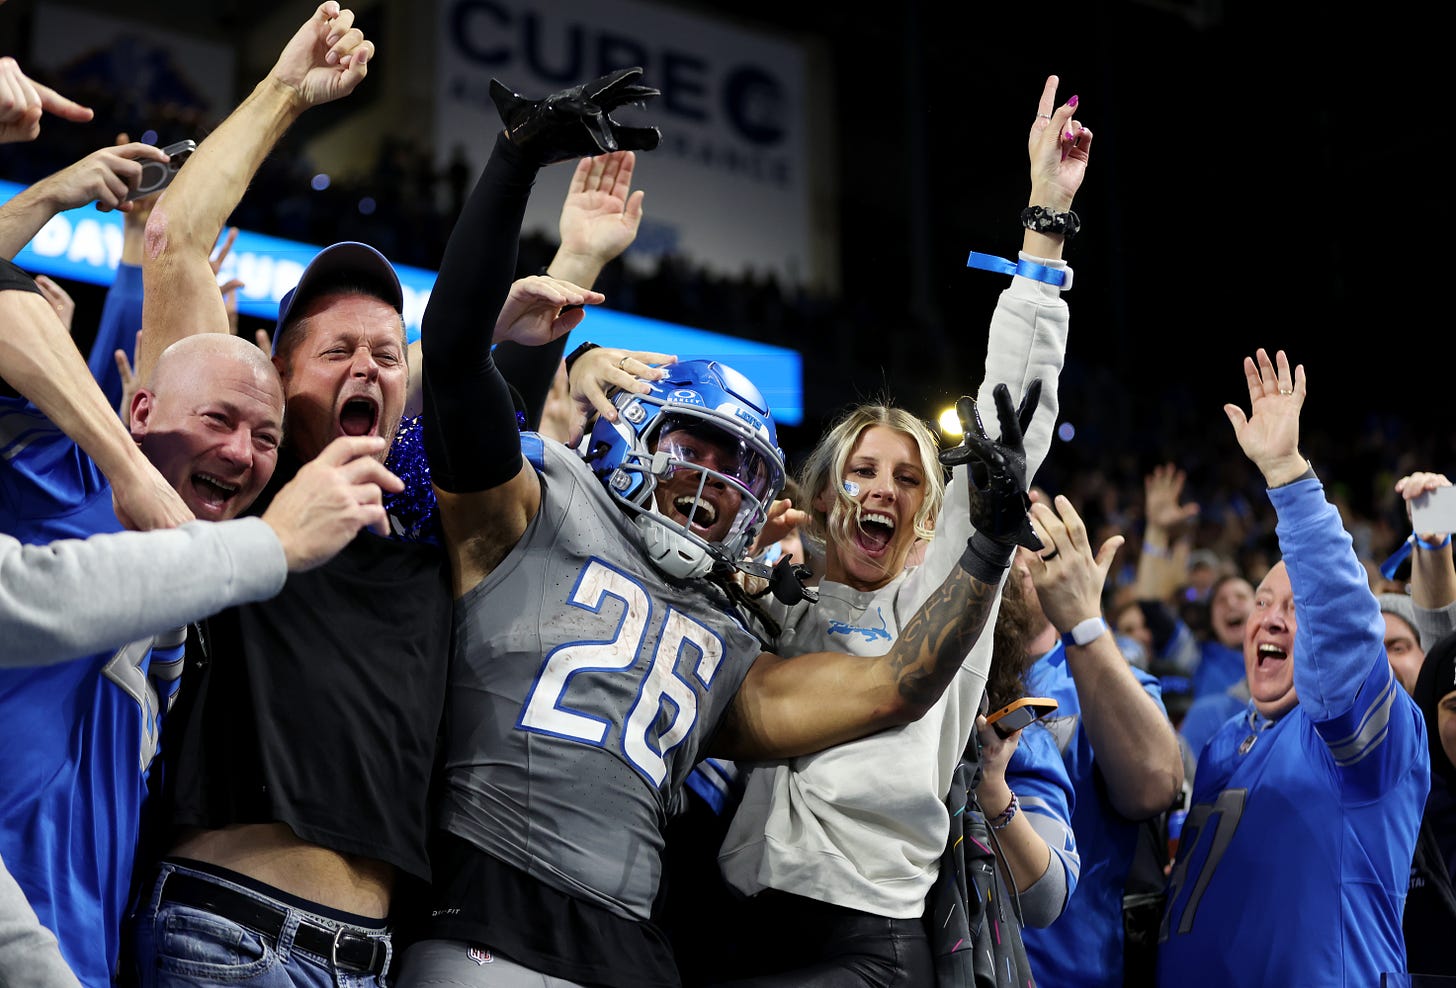 Shocked' woman lifts Detroit Lions' Gibbs into stands amid touchdown  celebration